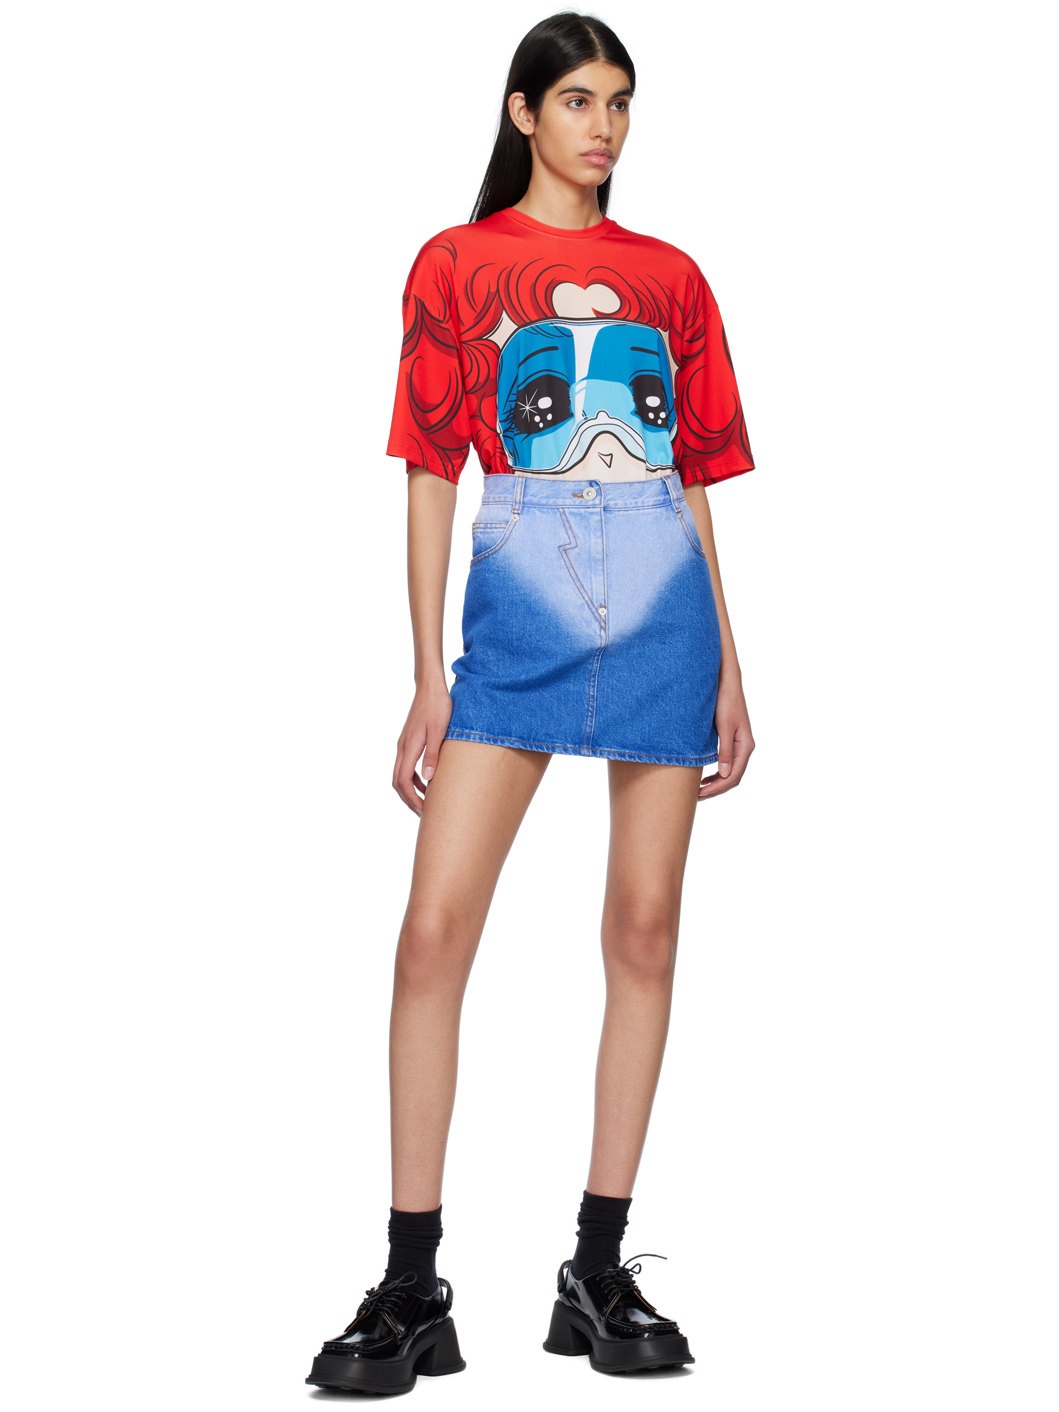 SSENSE Exclusive Red Goggle Girl T-Shirt - 4